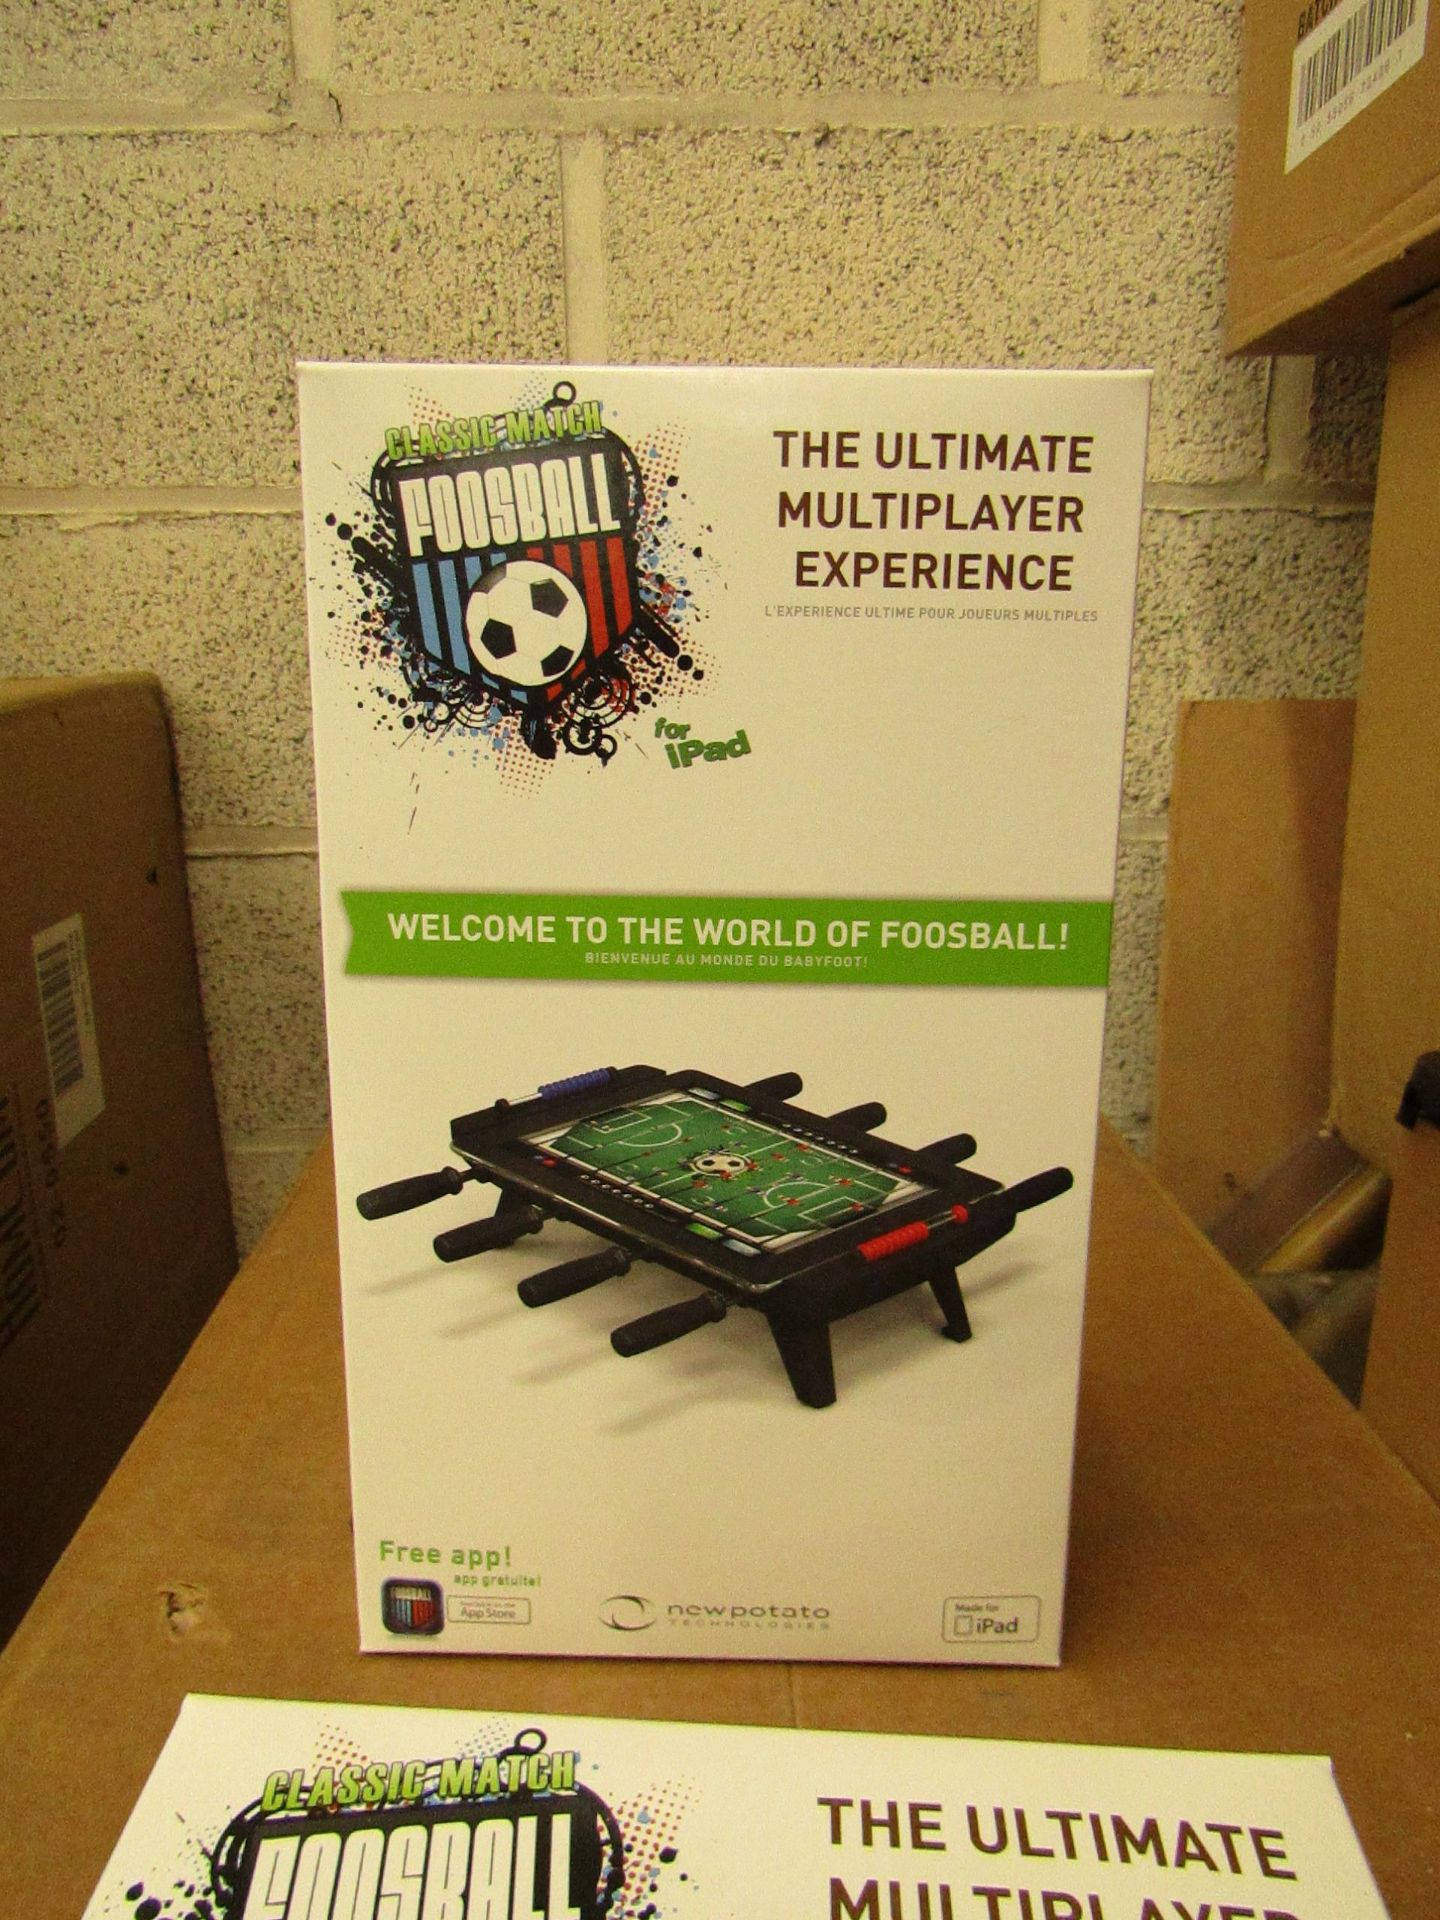 2x Classic Match Foosball iPad accessory,download the app - insert your ipad and play foosball - New